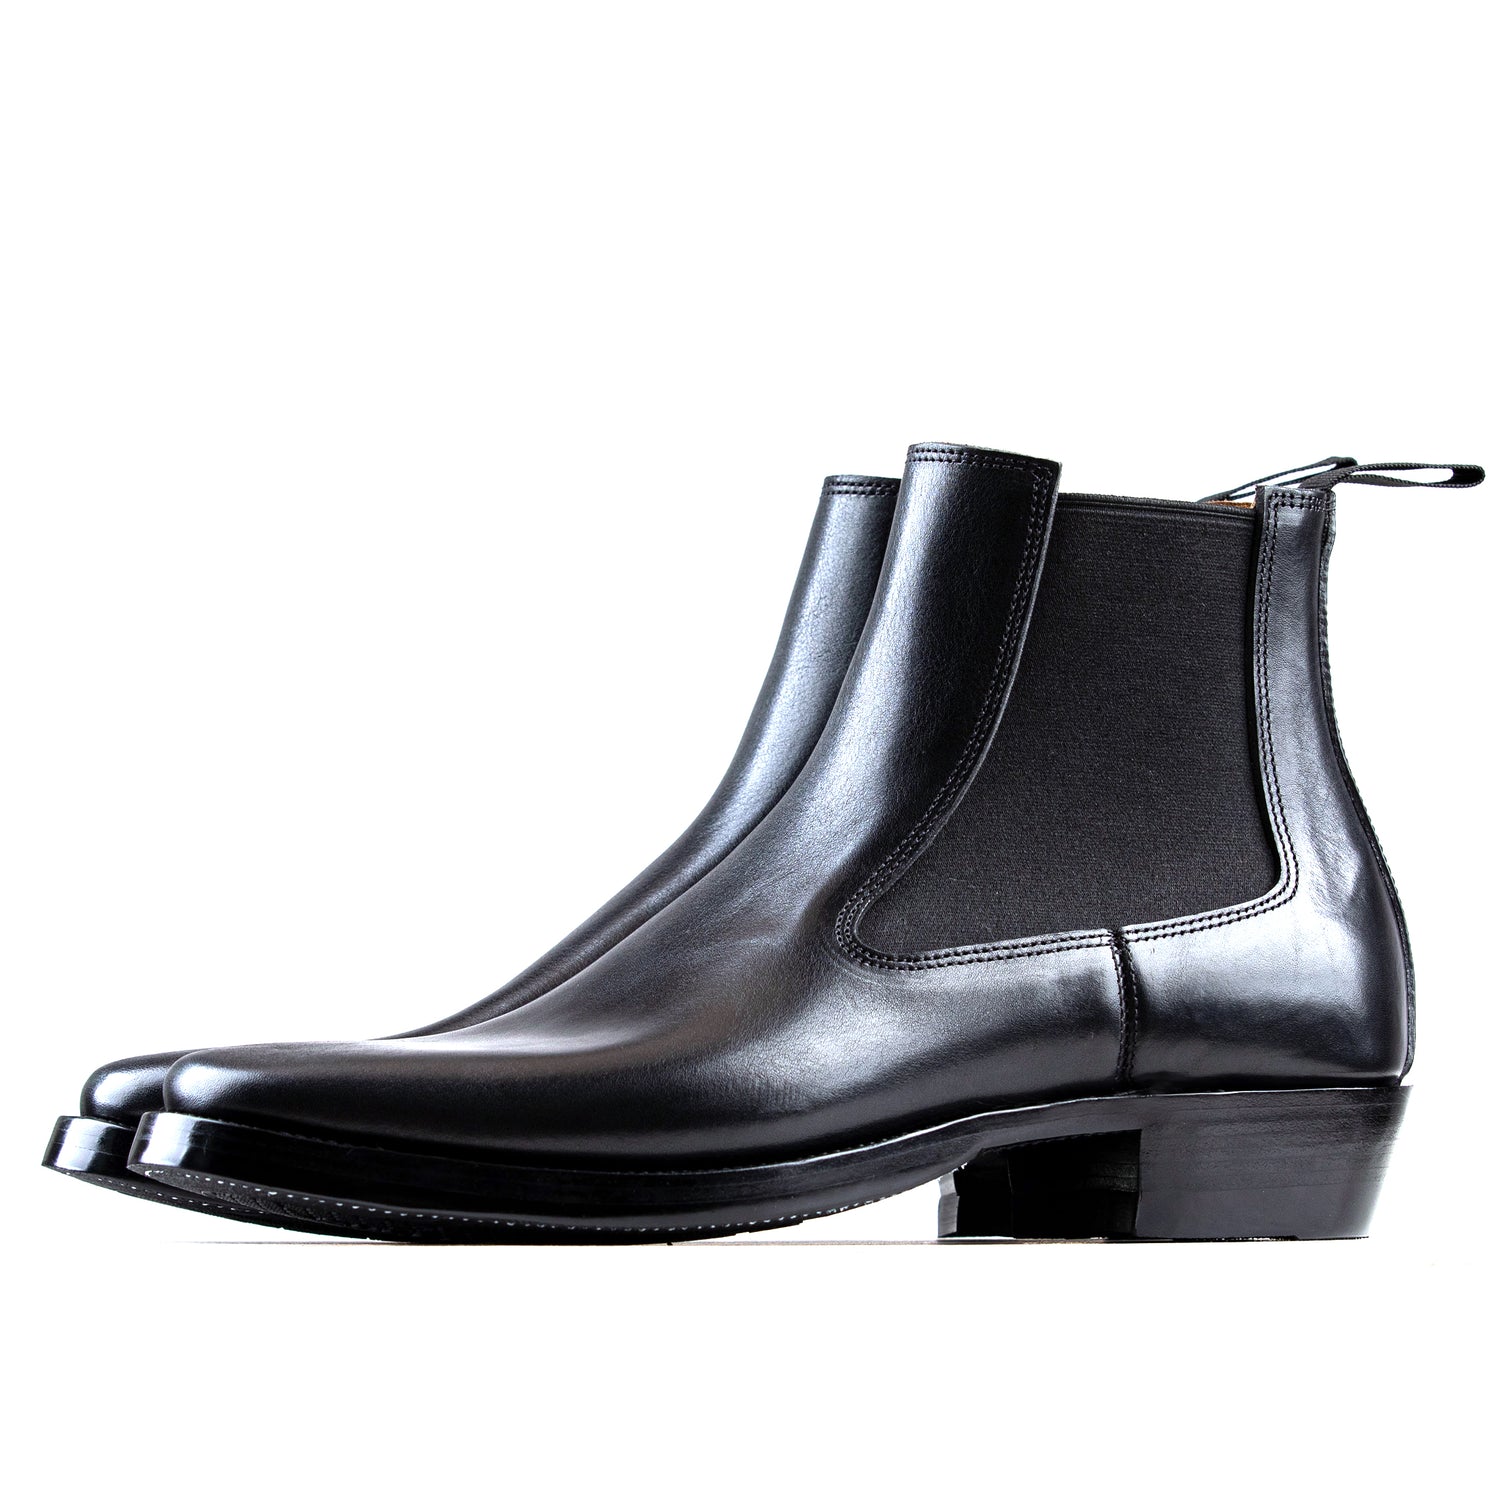 Chelsea Boots -Black Bull Hide - xbxs®boots factory